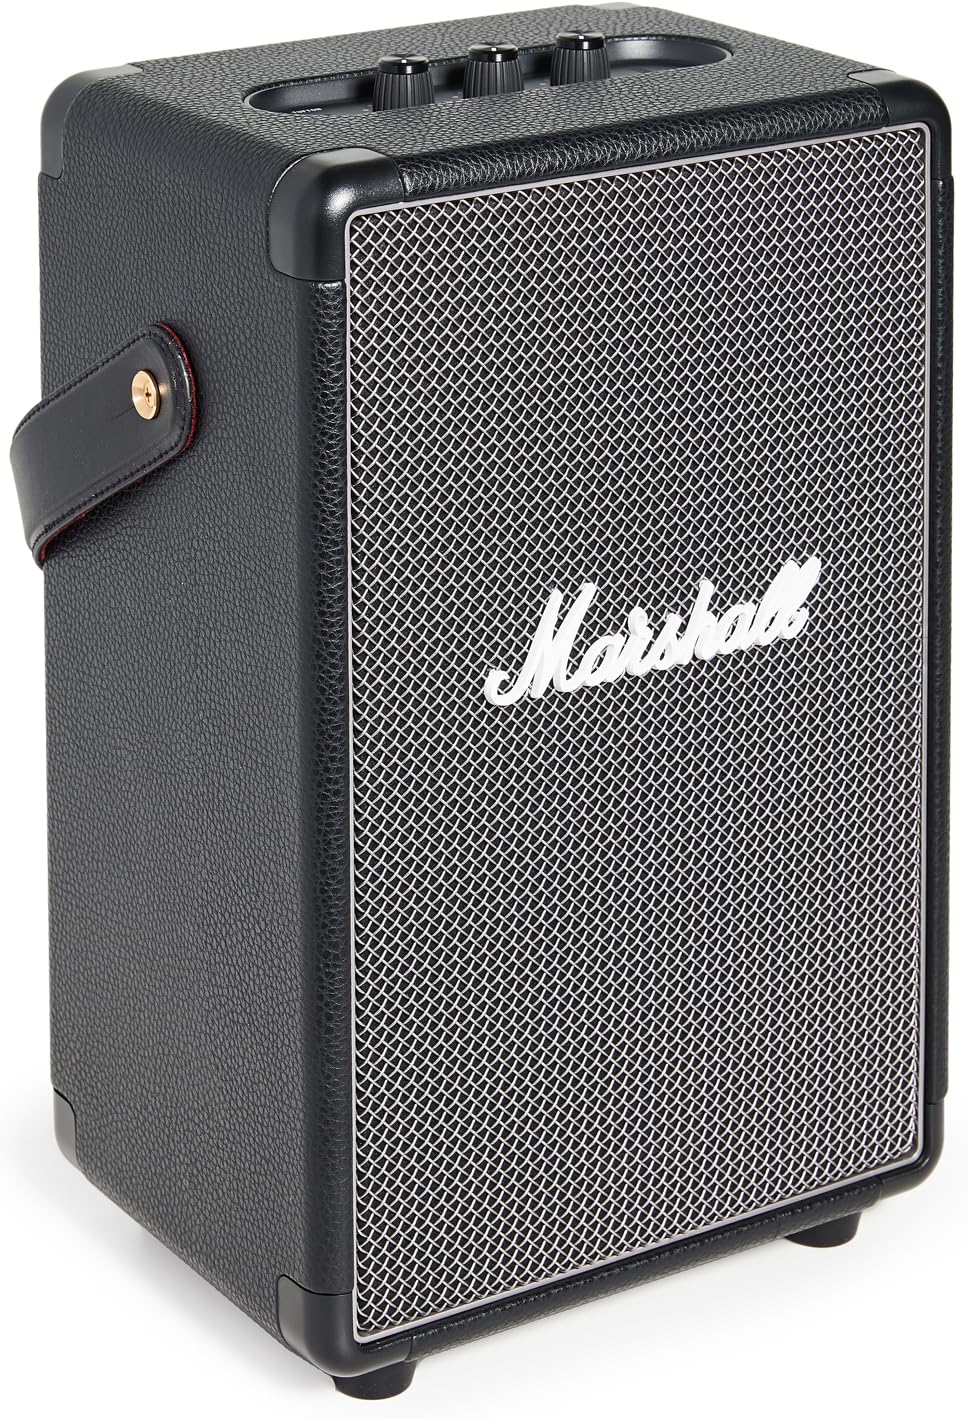 Marshall Tufton Portable Bluetooth Speaker - Black: Enjoy 20+ hours of portable playtime with multi-directional sound. 7340055362337